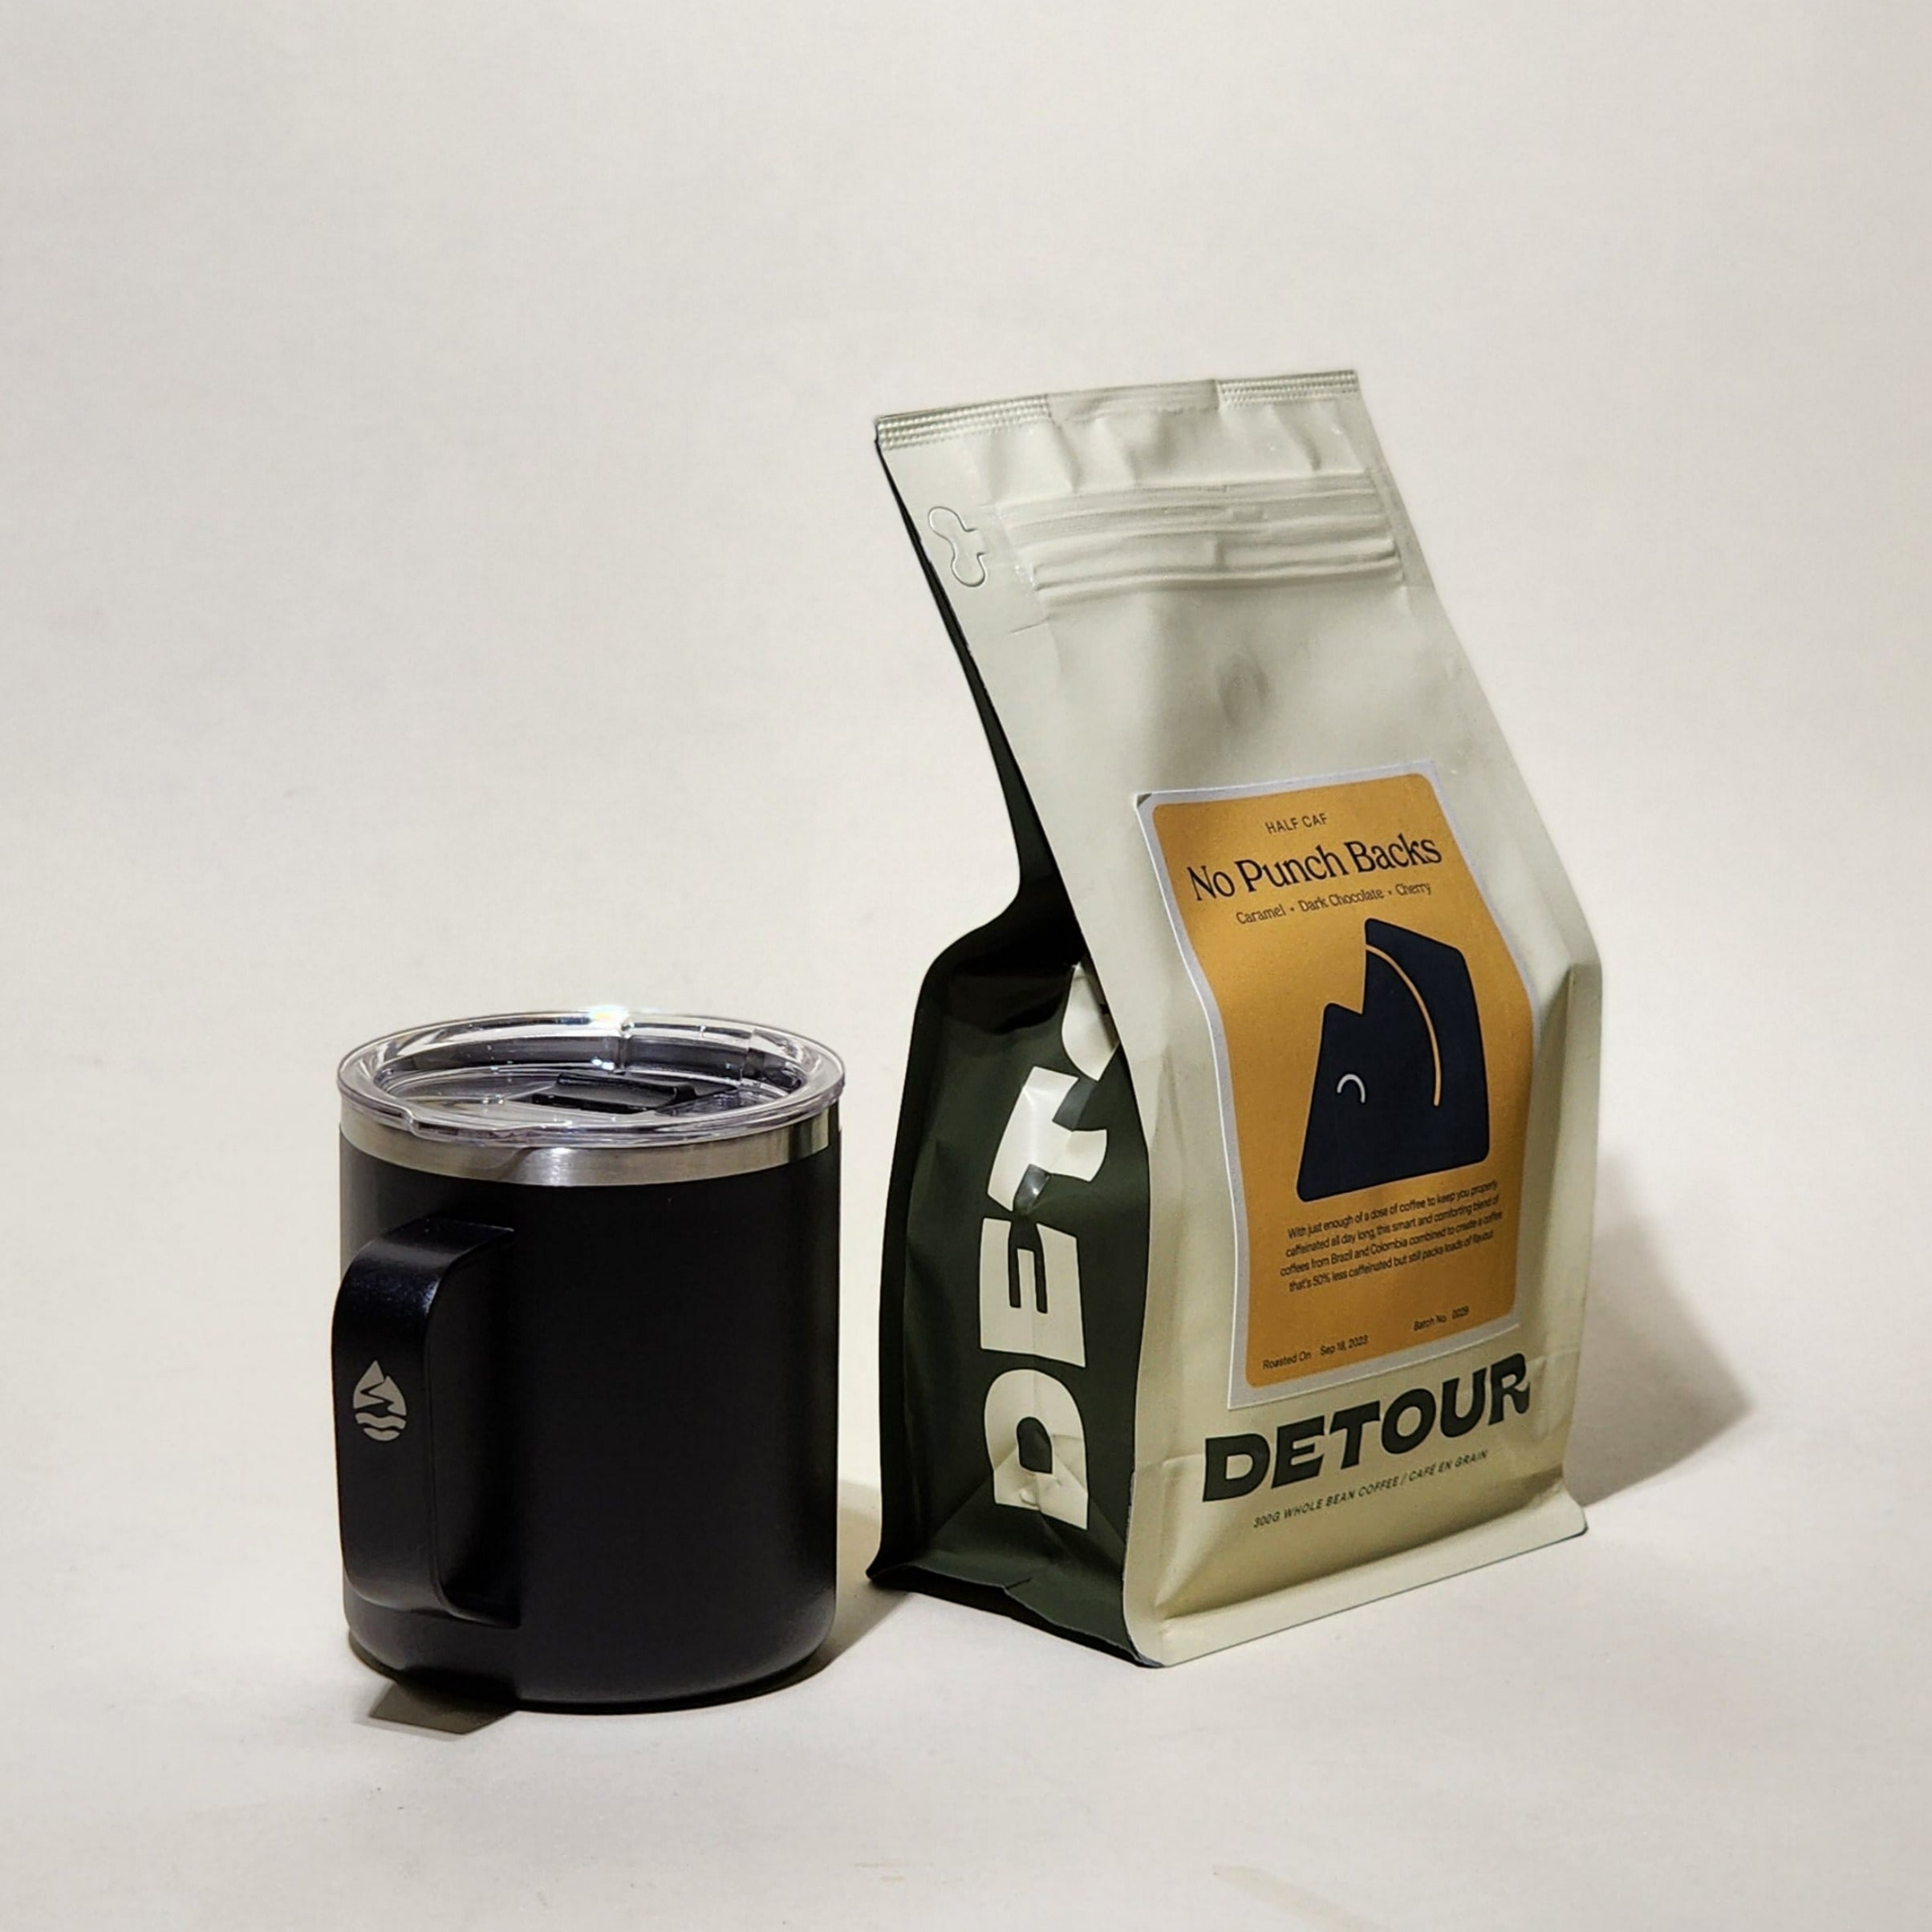 Detour Coffee Roaster No Punch Backs Half Caf - Caramel, Dark Chocolate, Cherry Tasting Profile - Filter Balanced Coffee Style - Brazil + Colombia Origin - Learn More on Our Website